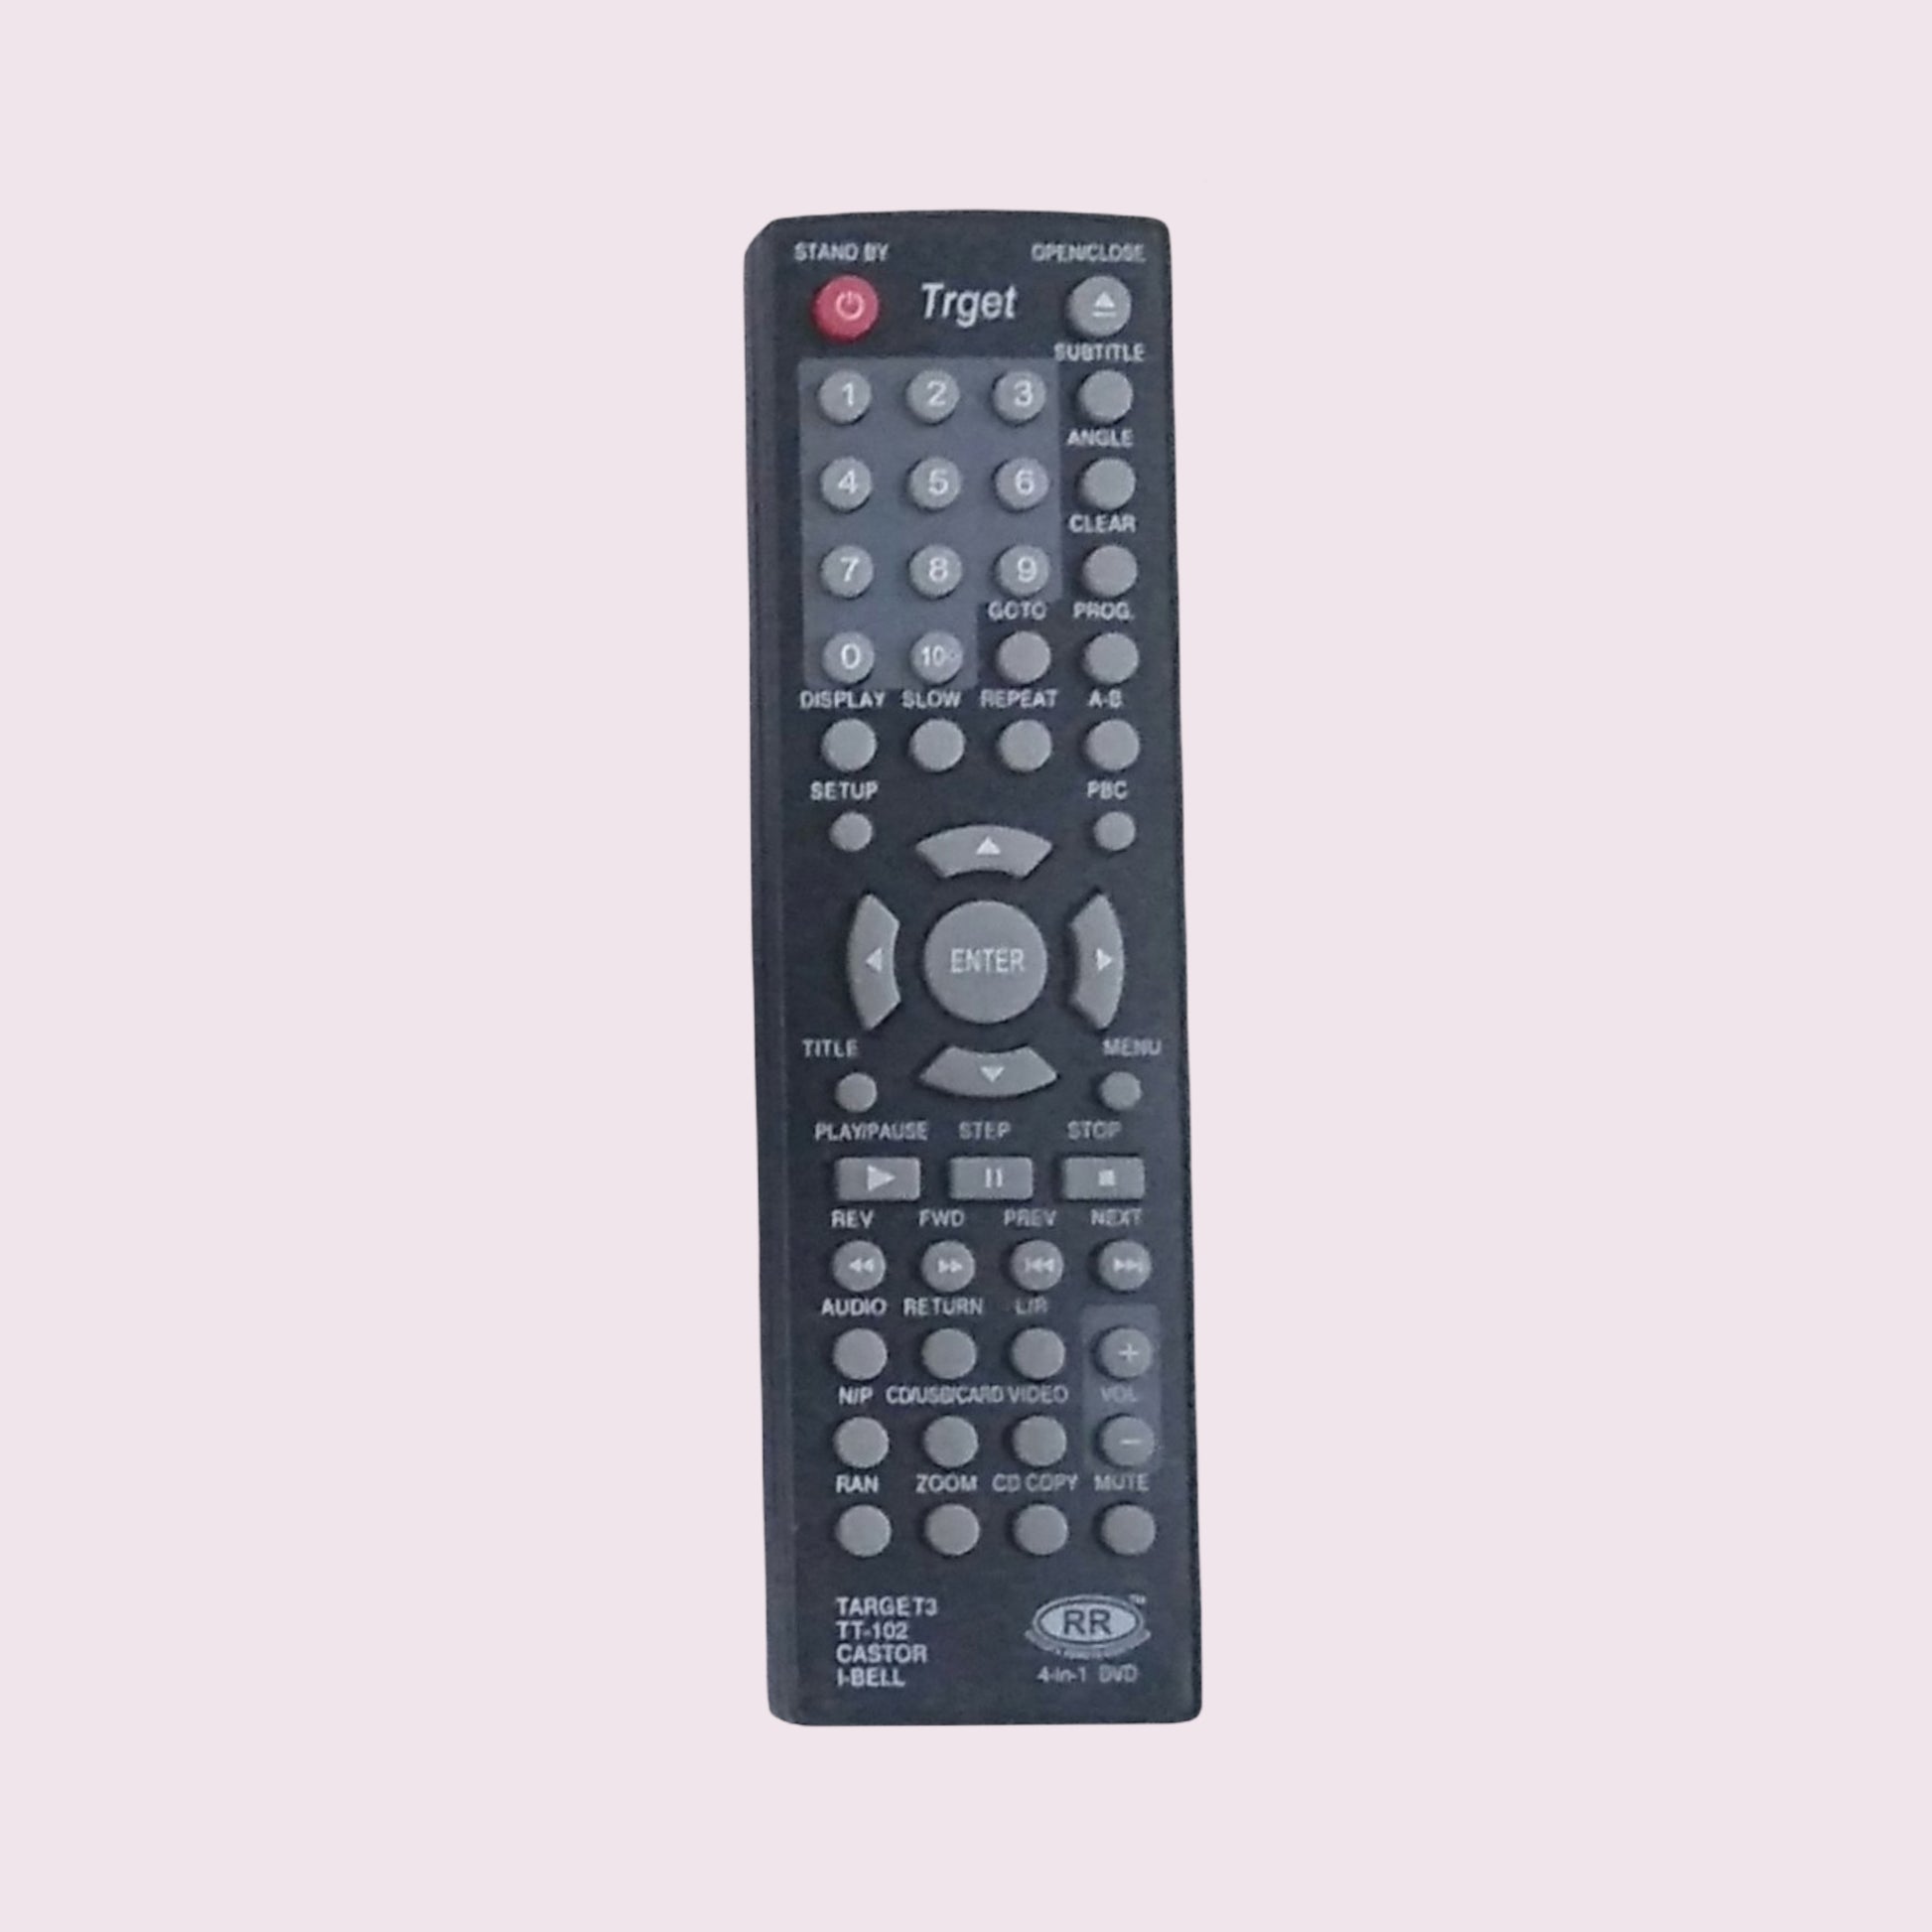 Target,  Taotronics, Caster, I Ball 4 in 1 dvd player remote control (DV30) - Faritha